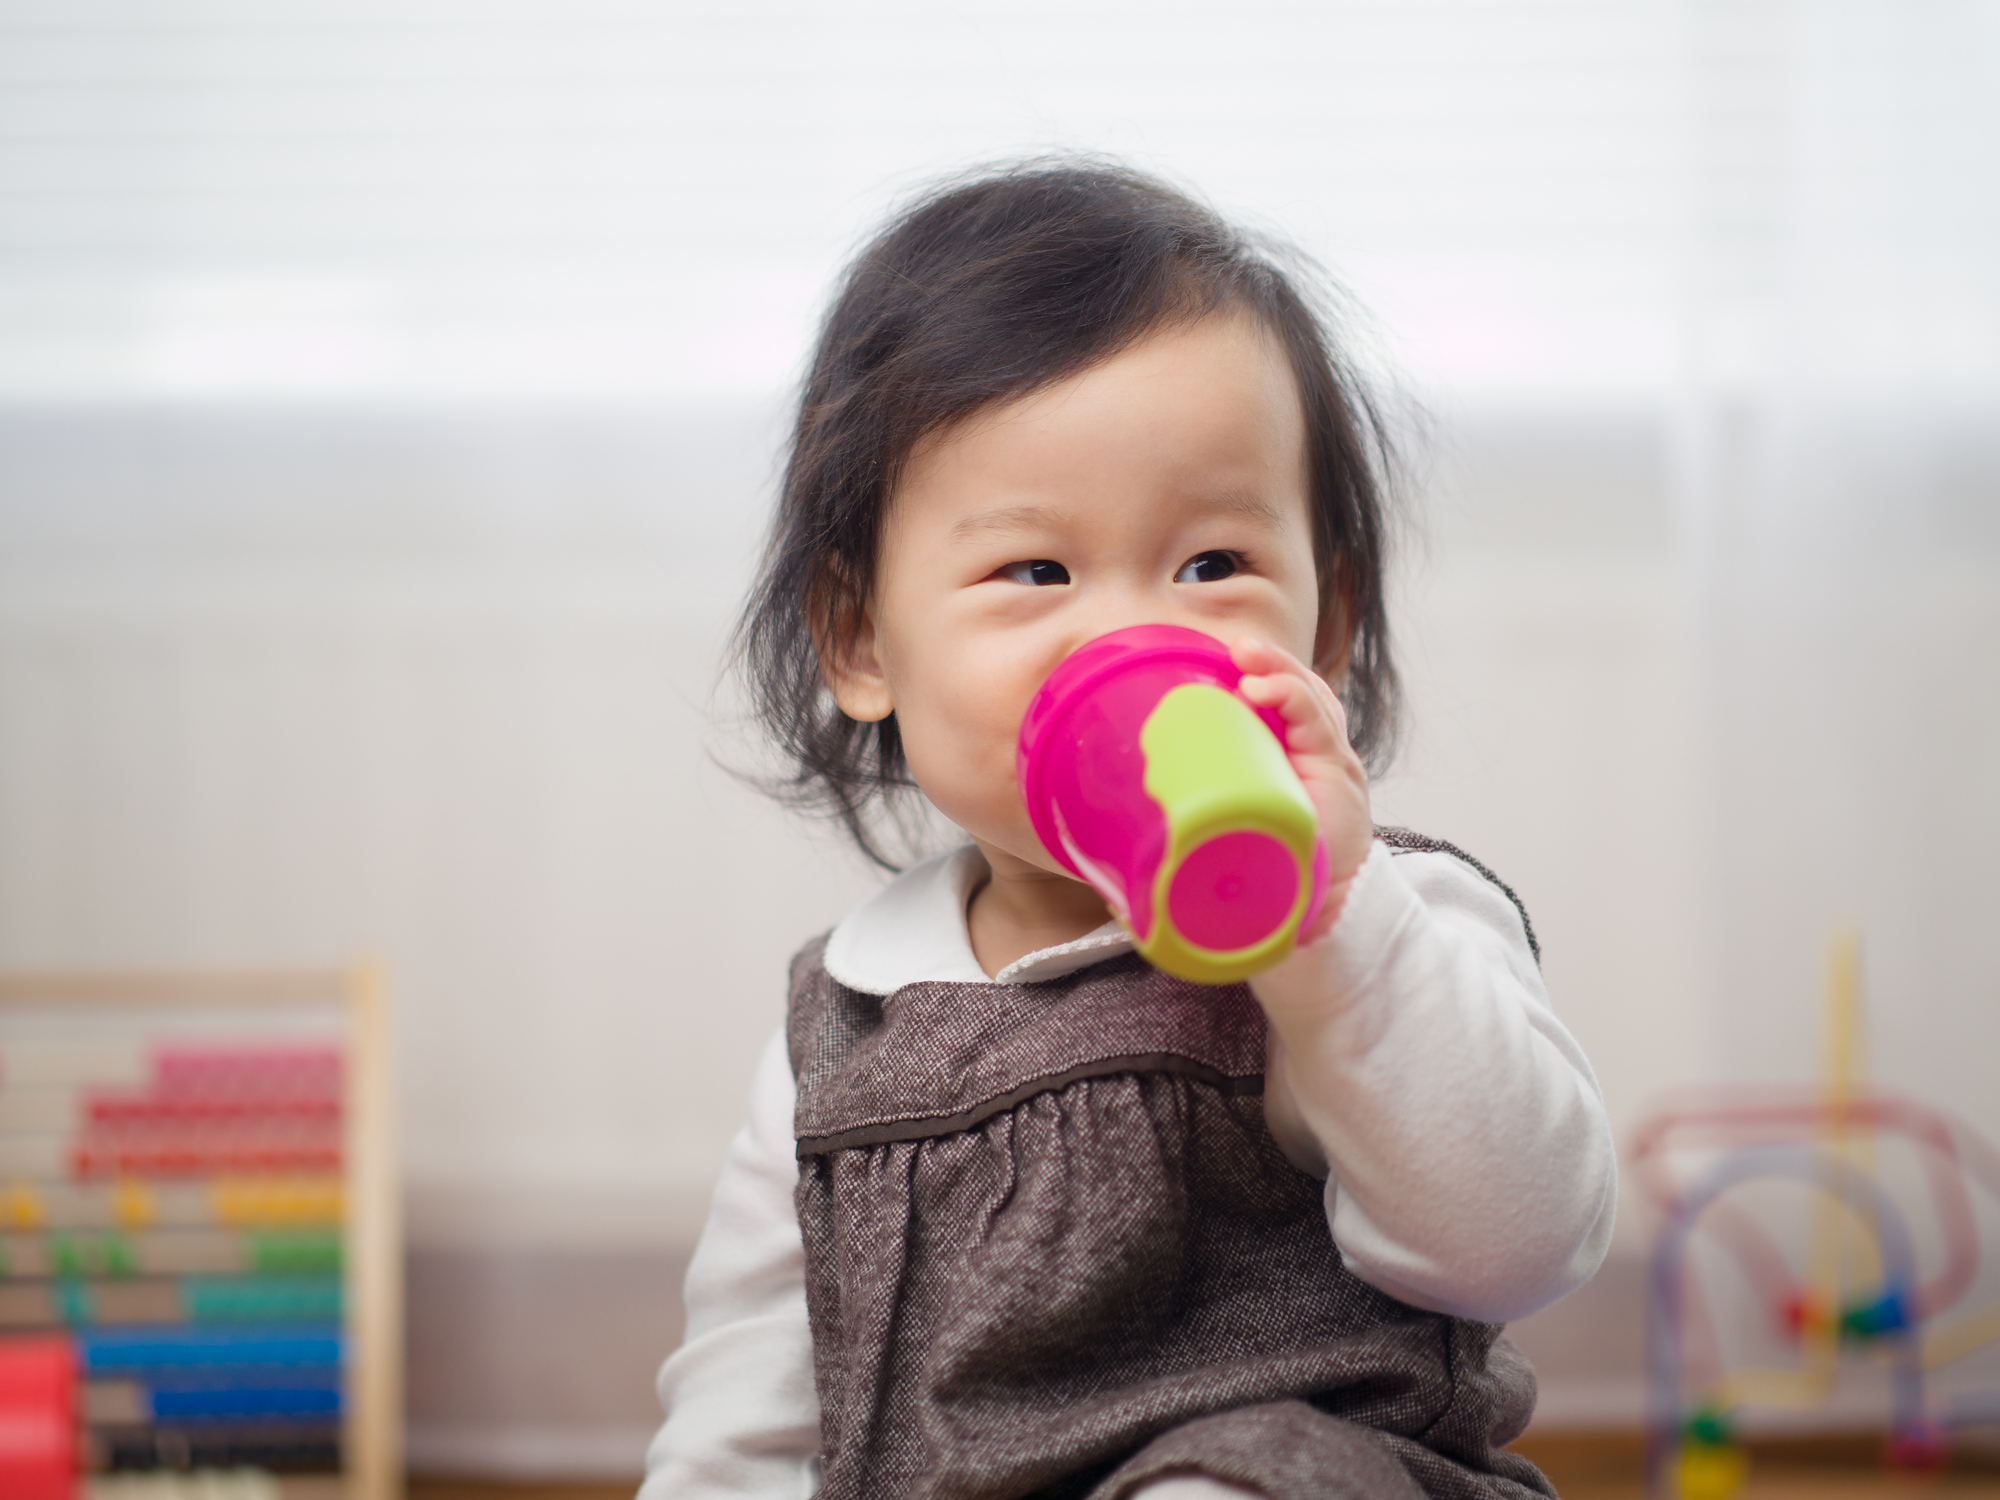 Sippy Cups - When to Replace